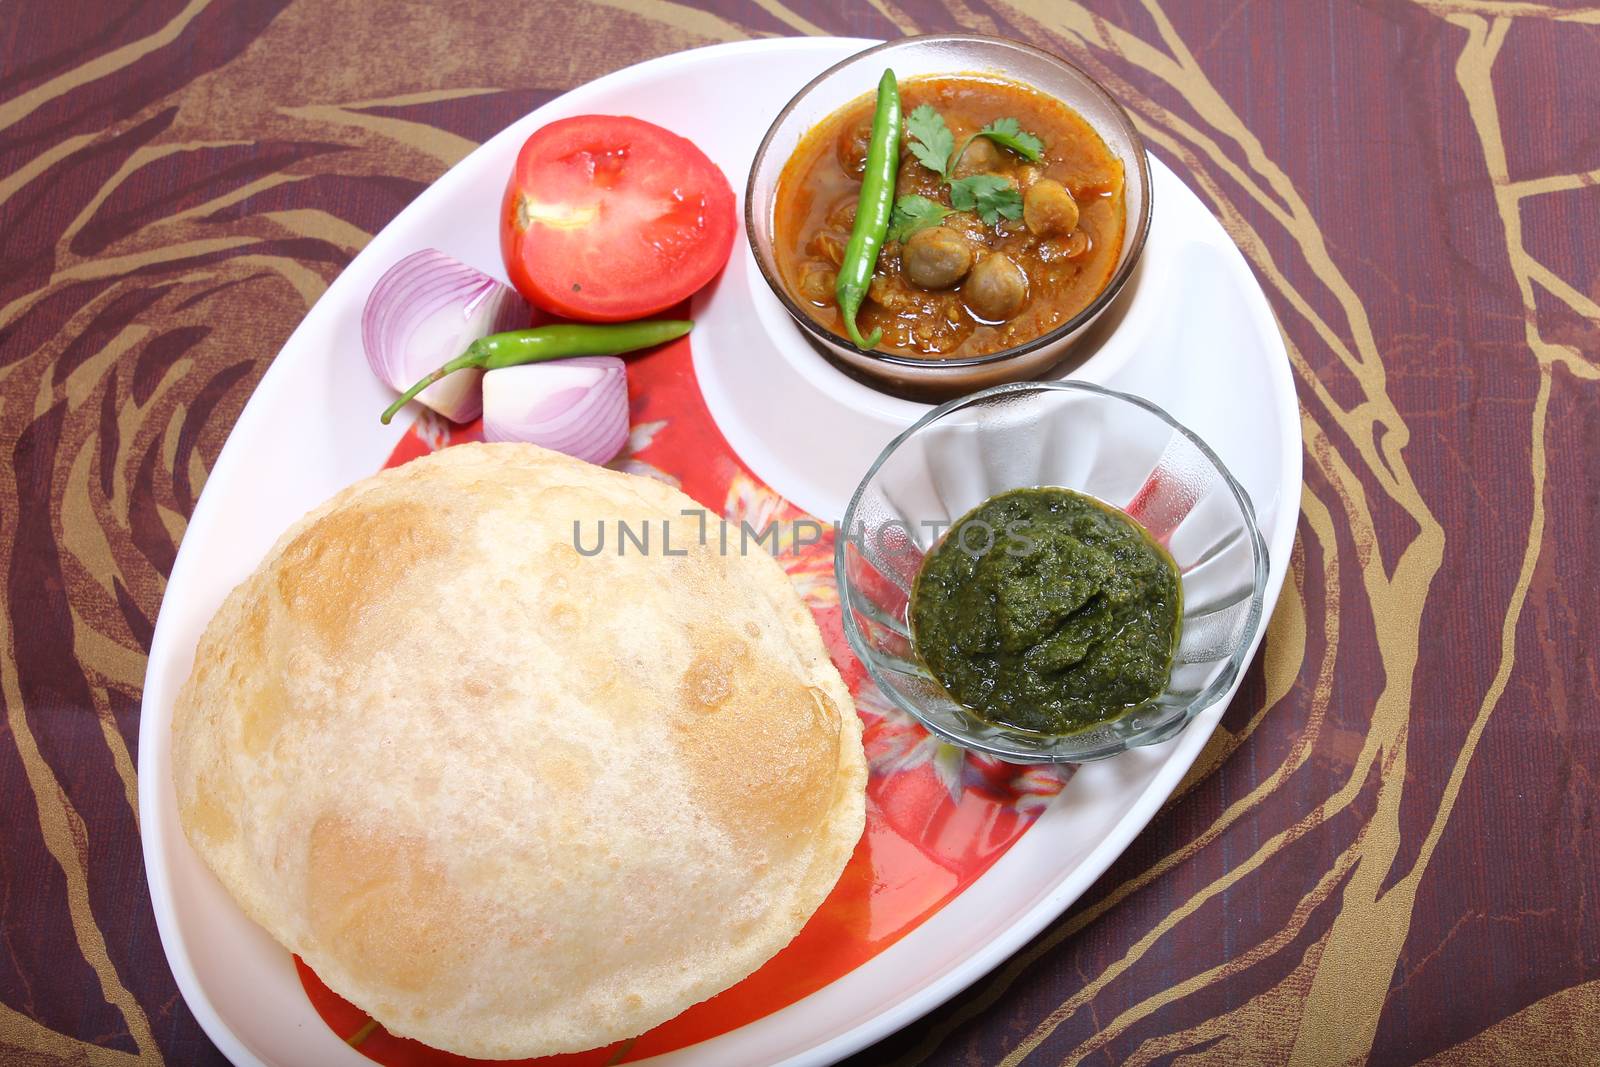 plate of spicy chole bhature, with green chili topping and chutney
indian dish